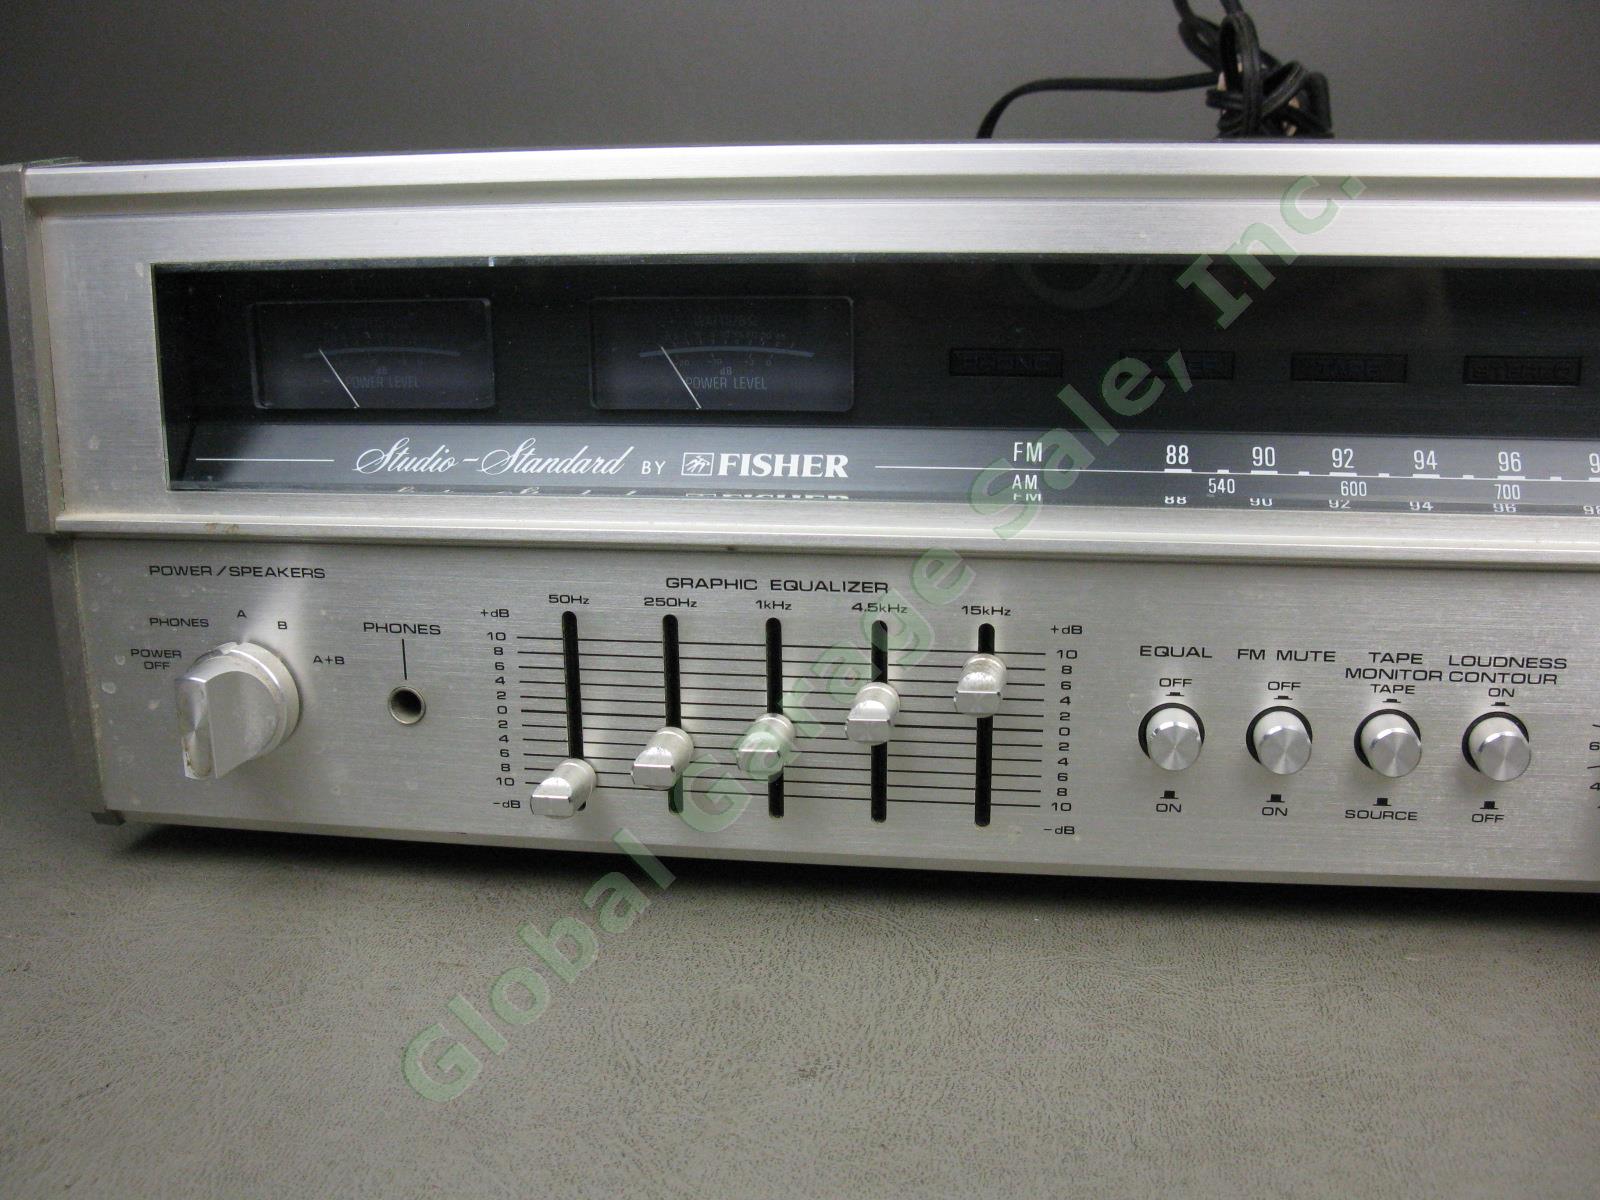 Vtg Studio-Standard By Fisher RS-2004A AM/FM Stereo Receiver Tuner Amp 45WPC NR! 1